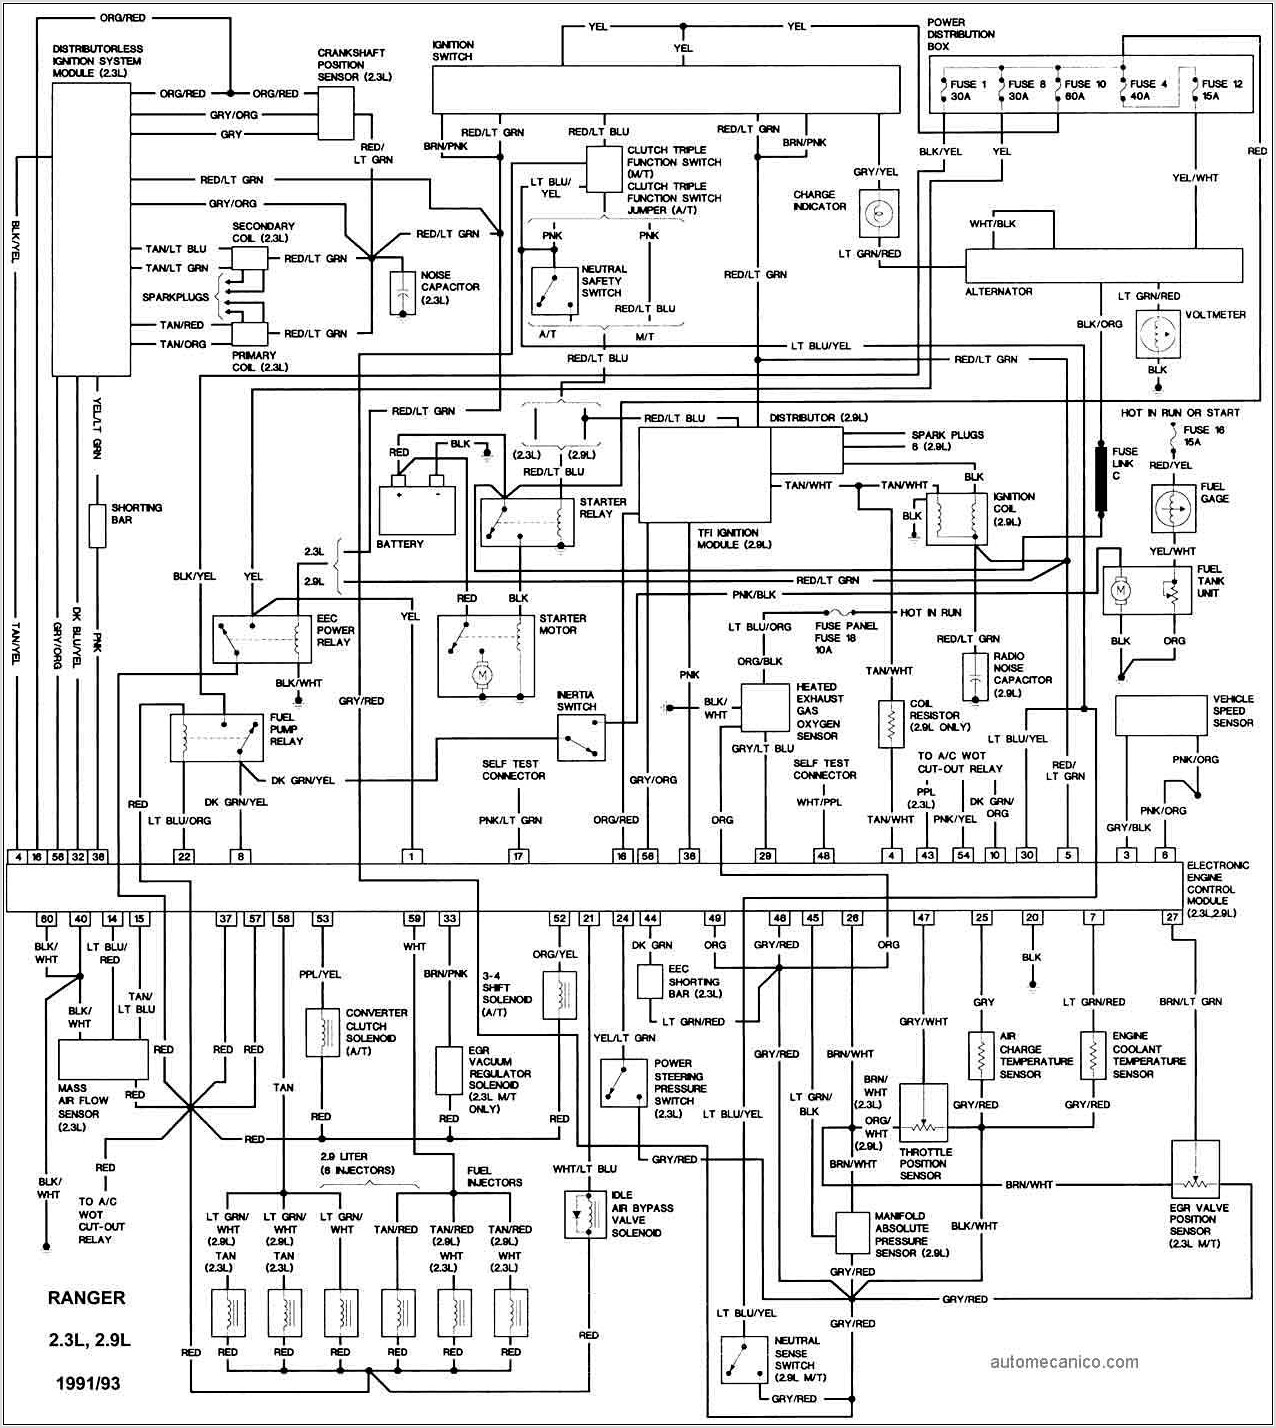 2003 Ford Explorer Wiring Harness Diagram